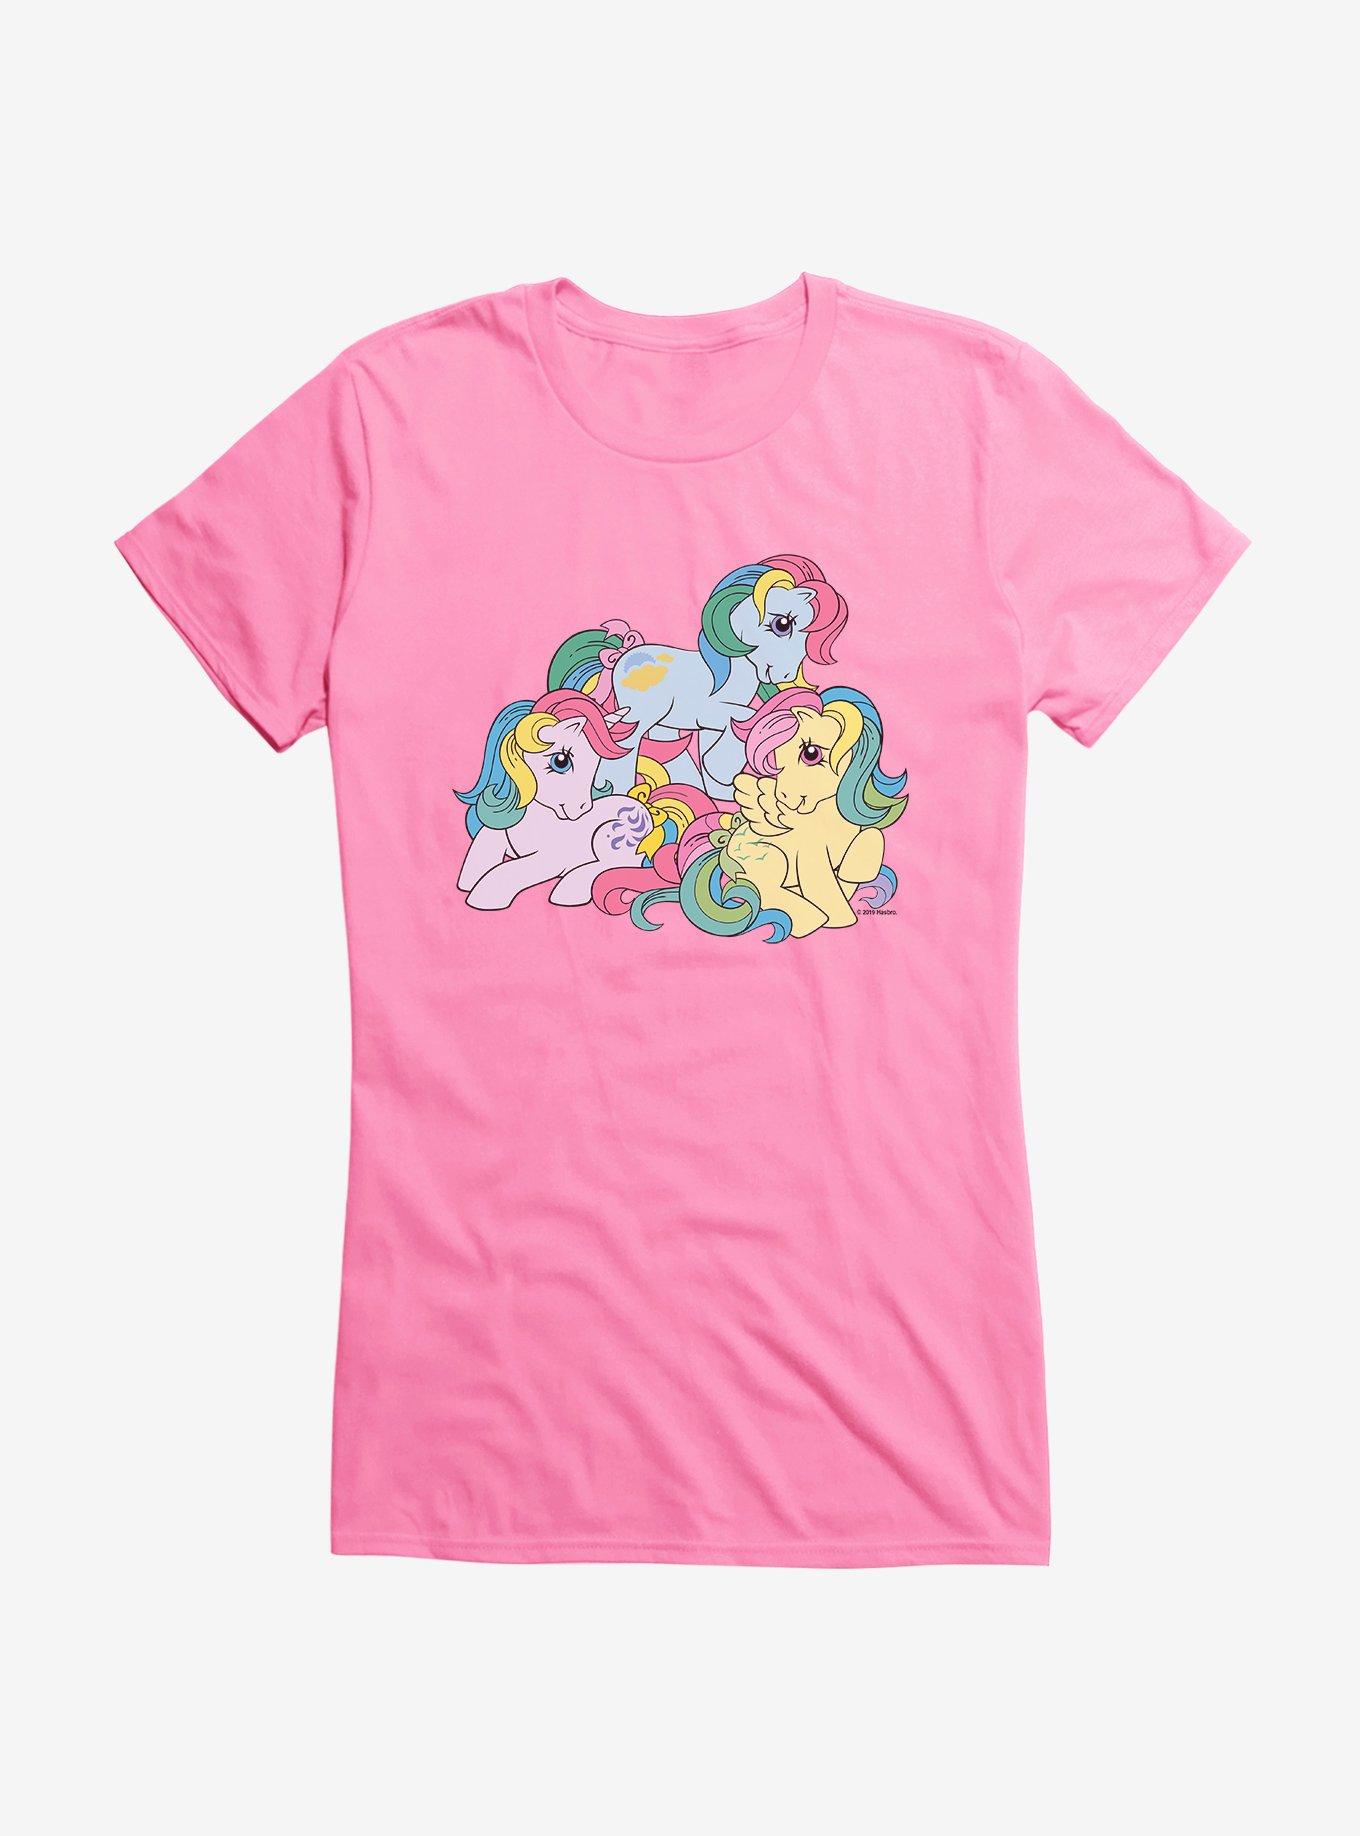 My Little Pony Forever Friends Girls T-Shirt, , hi-res